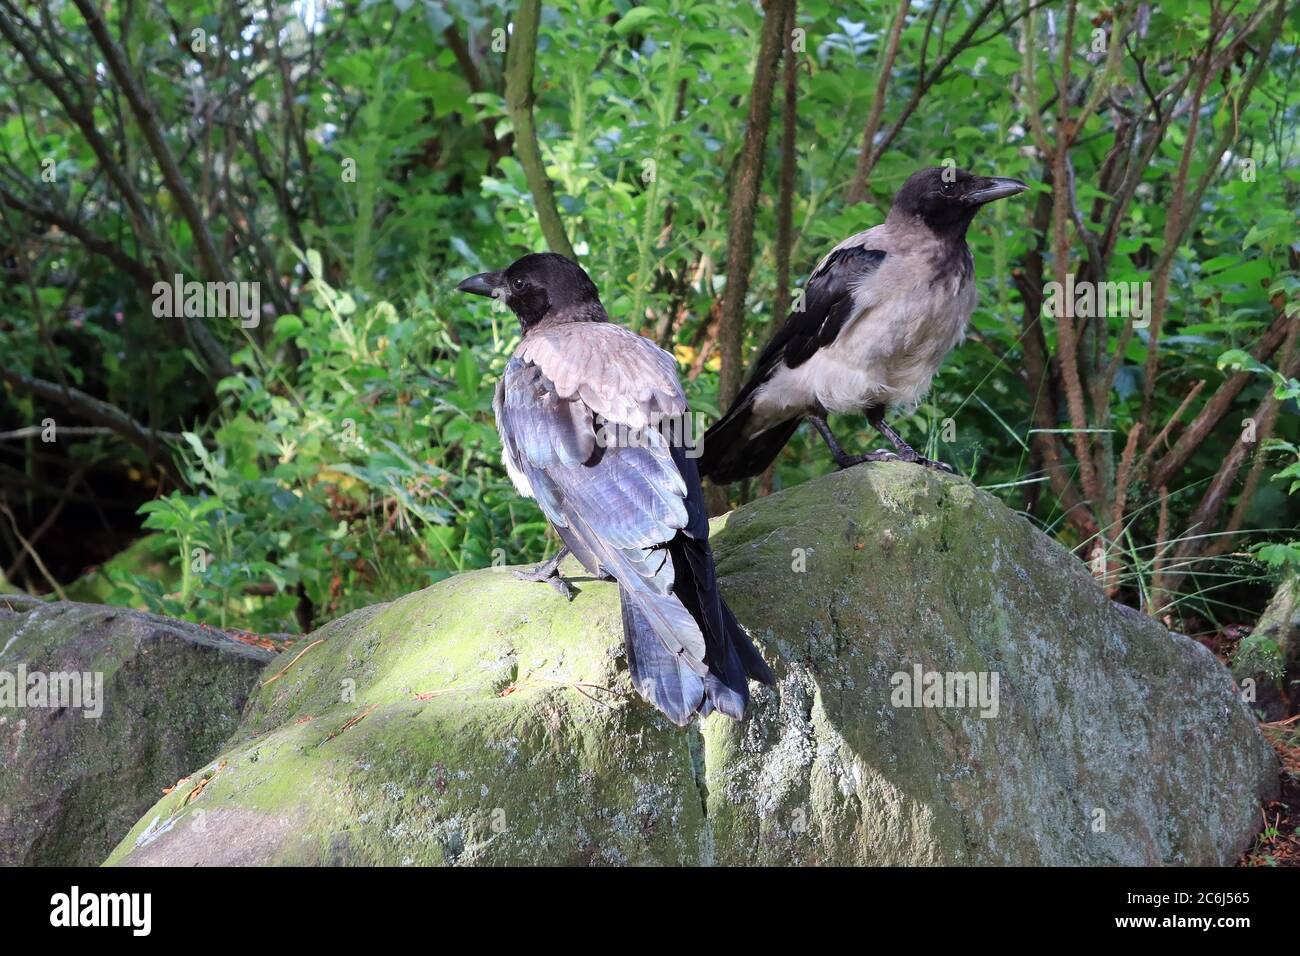 Two young Hooded Crows, Corvus cornix, perched on a rock in natural environment. Stock Photo